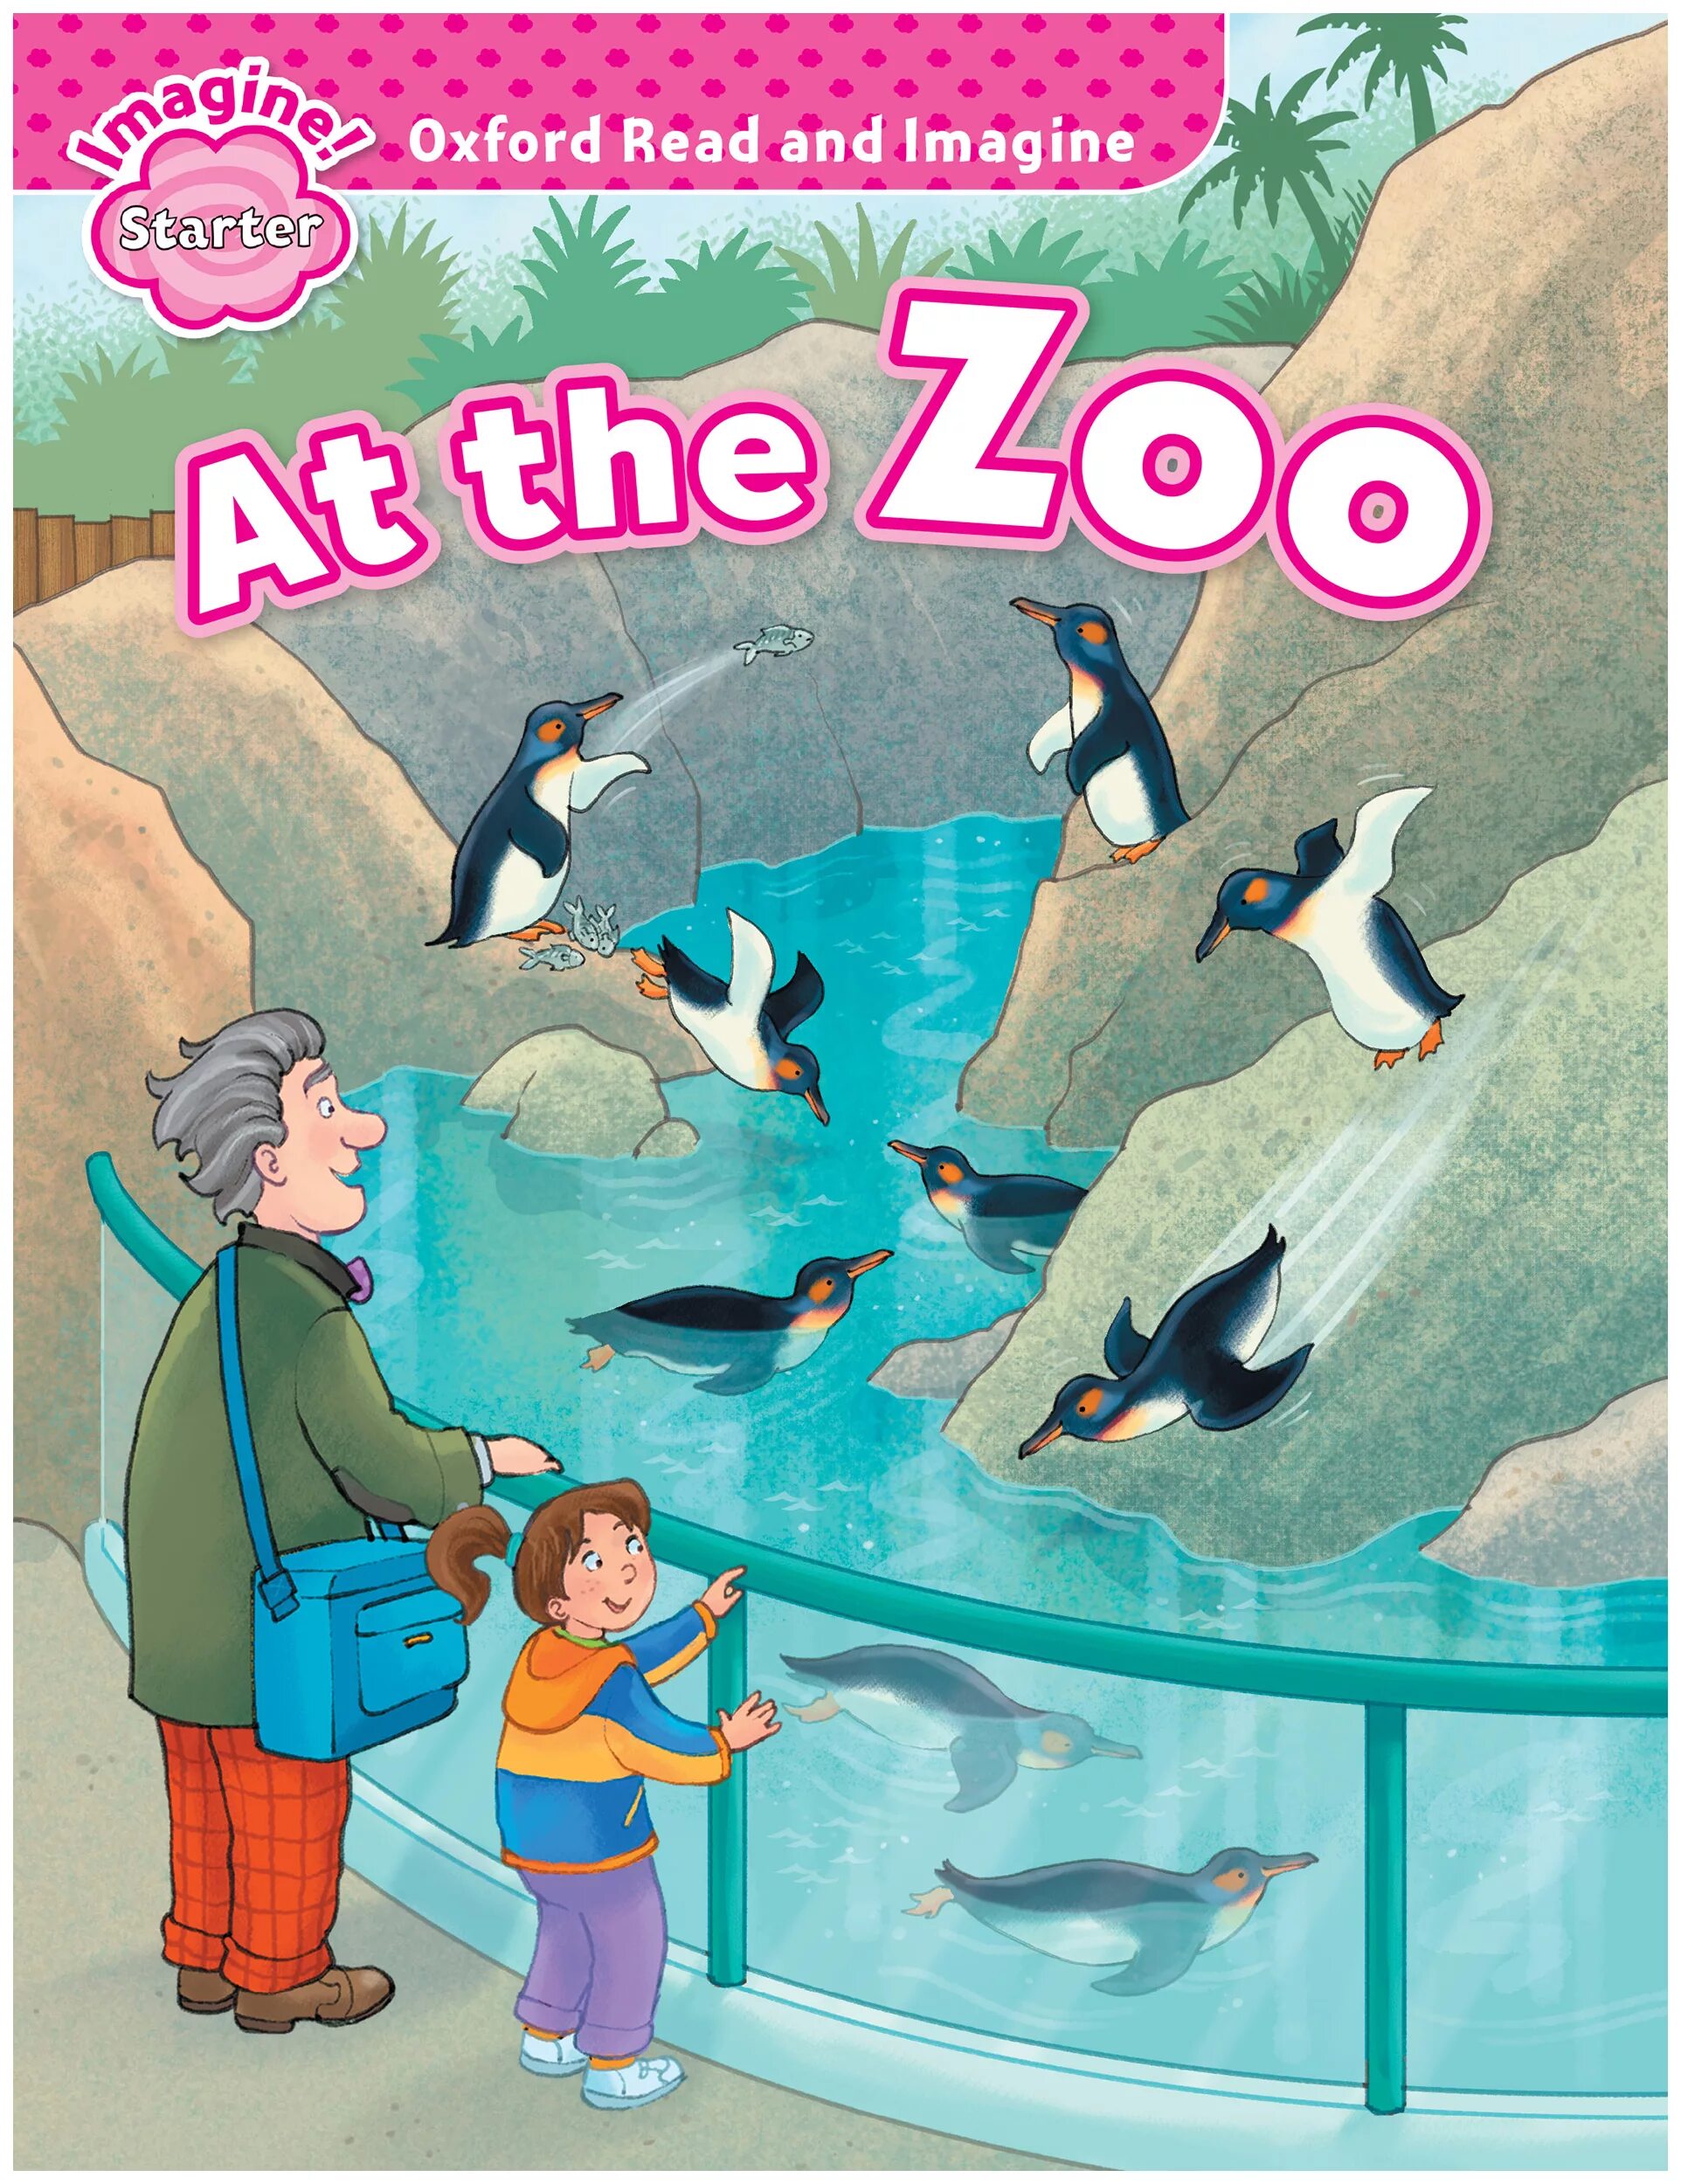 Oxford reading and imagine. Oxford read and imagine. At the Zoo. Oxford Graded Readers. Oxford read and imagine Starter купить.